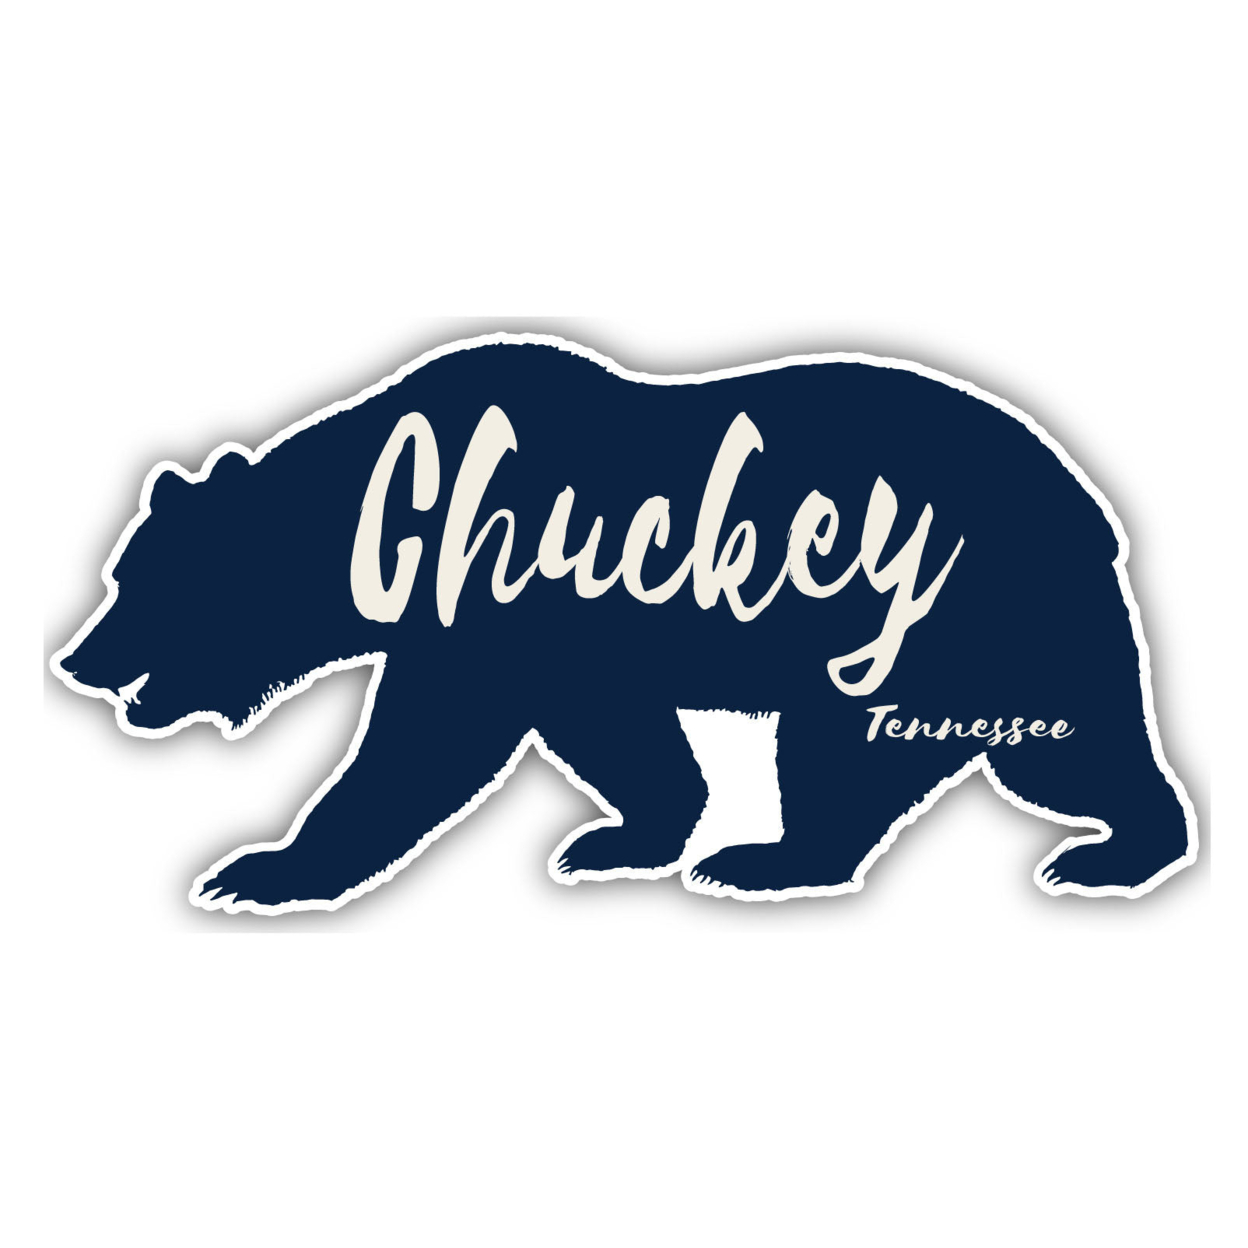 Chuckey Tennessee Souvenir Decorative Stickers (Choose Theme And Size) - Single Unit, 6-Inch, Bear